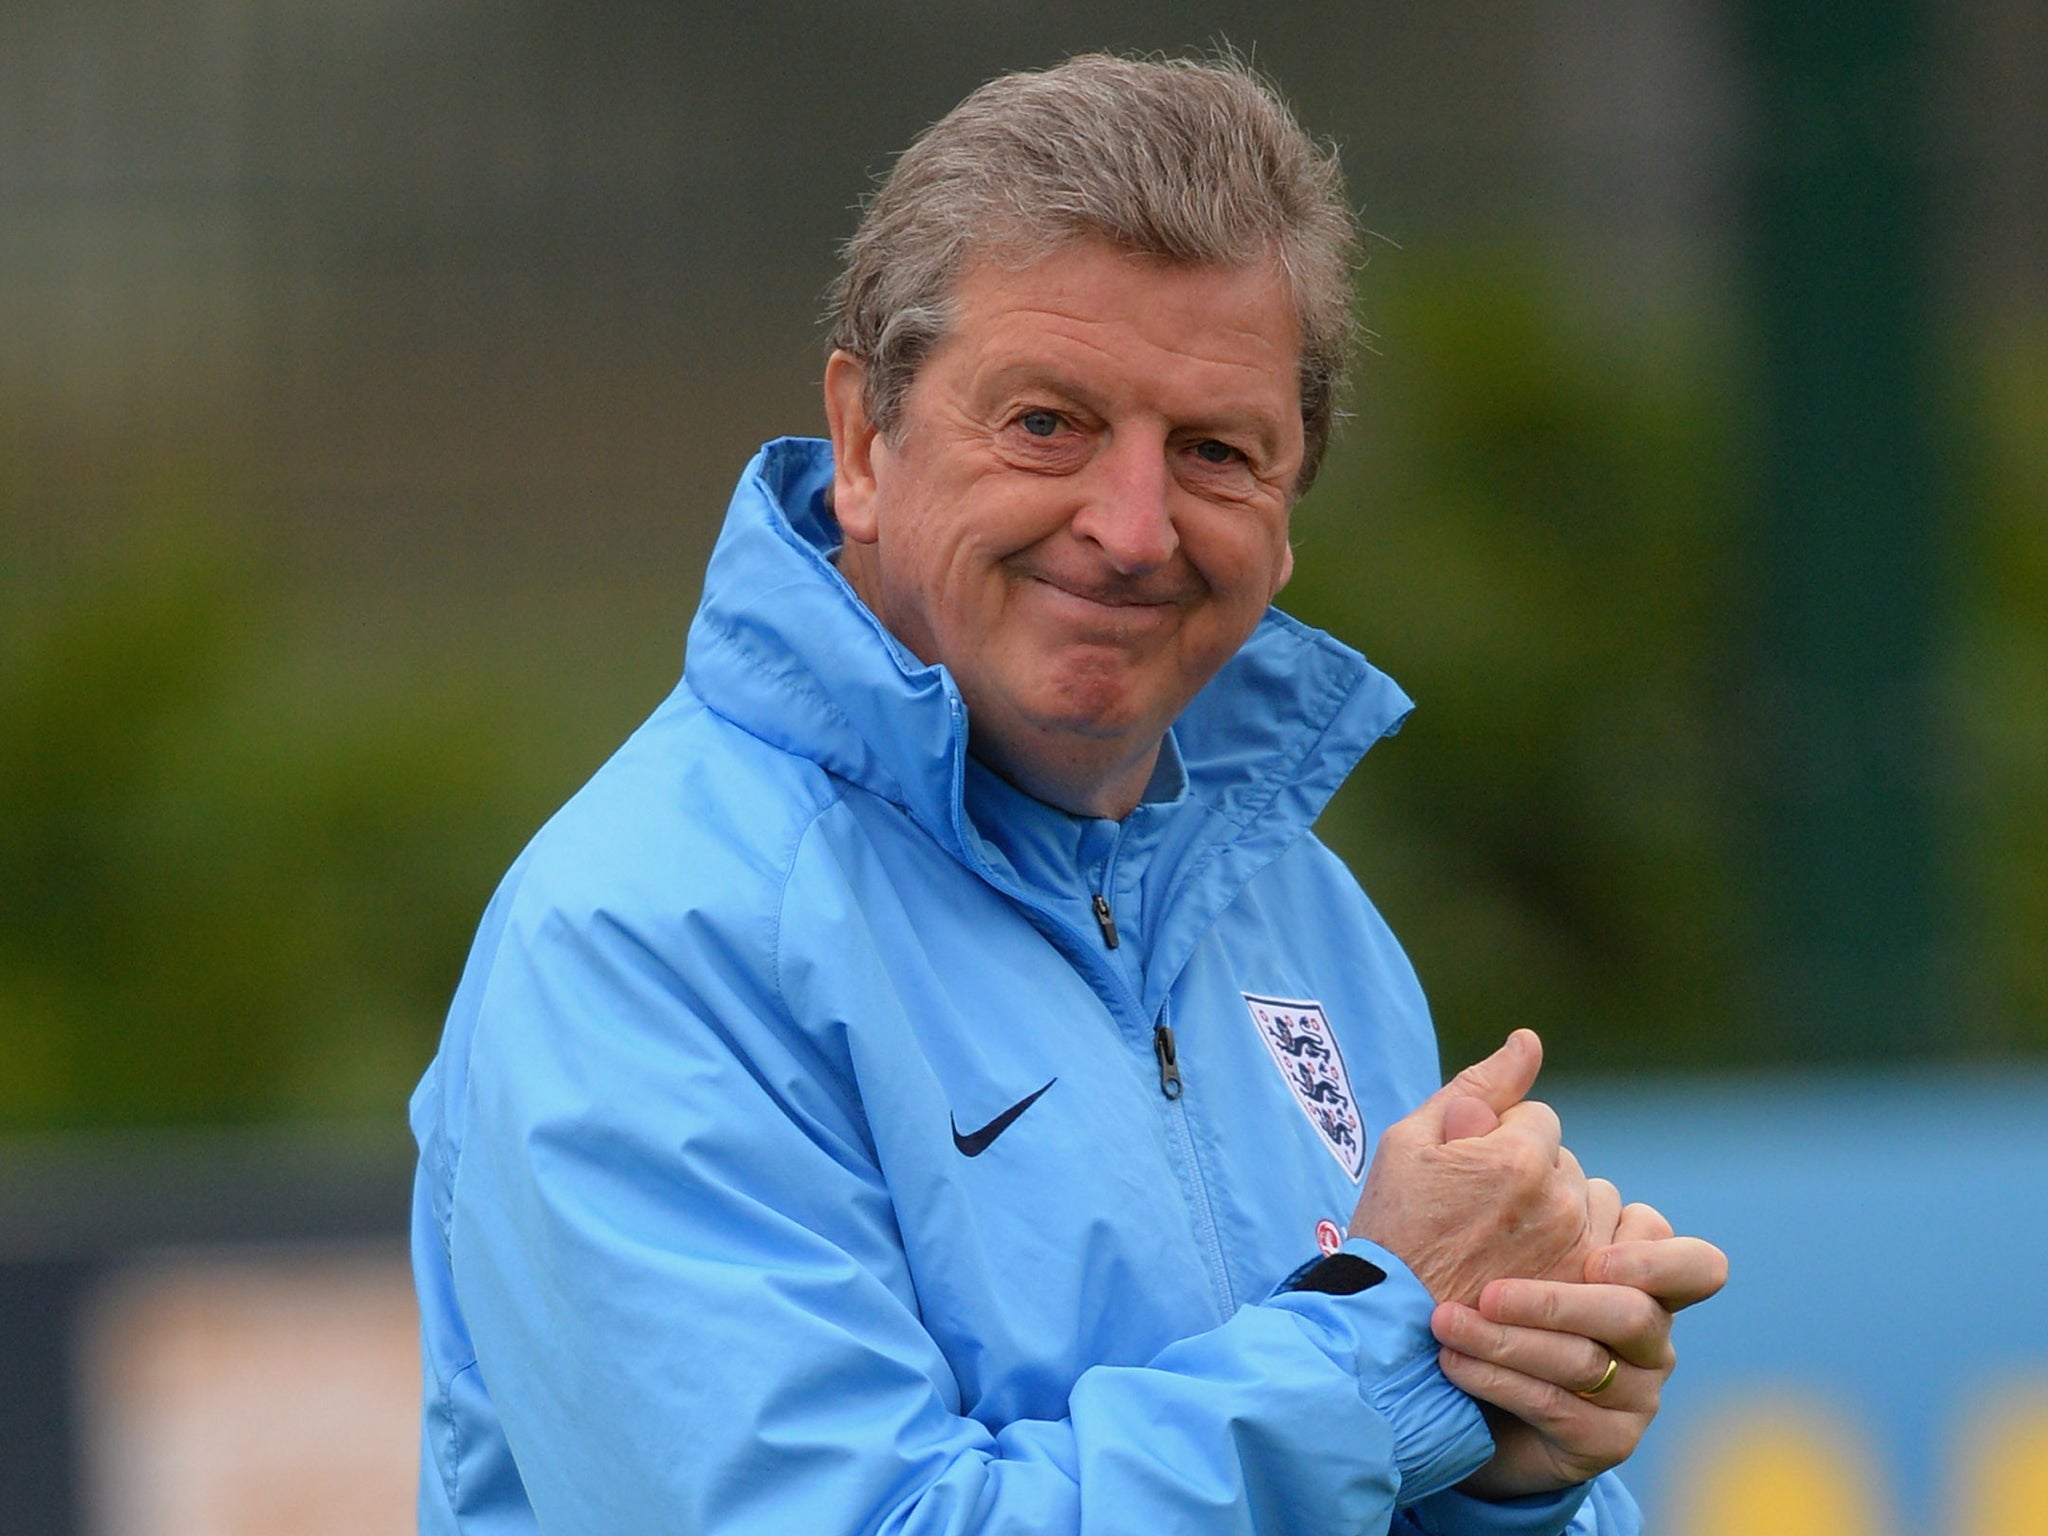 England manager Roy Hodgson has admitted that he is more concerned about the location of the World Cup fixtures rather than the opposition